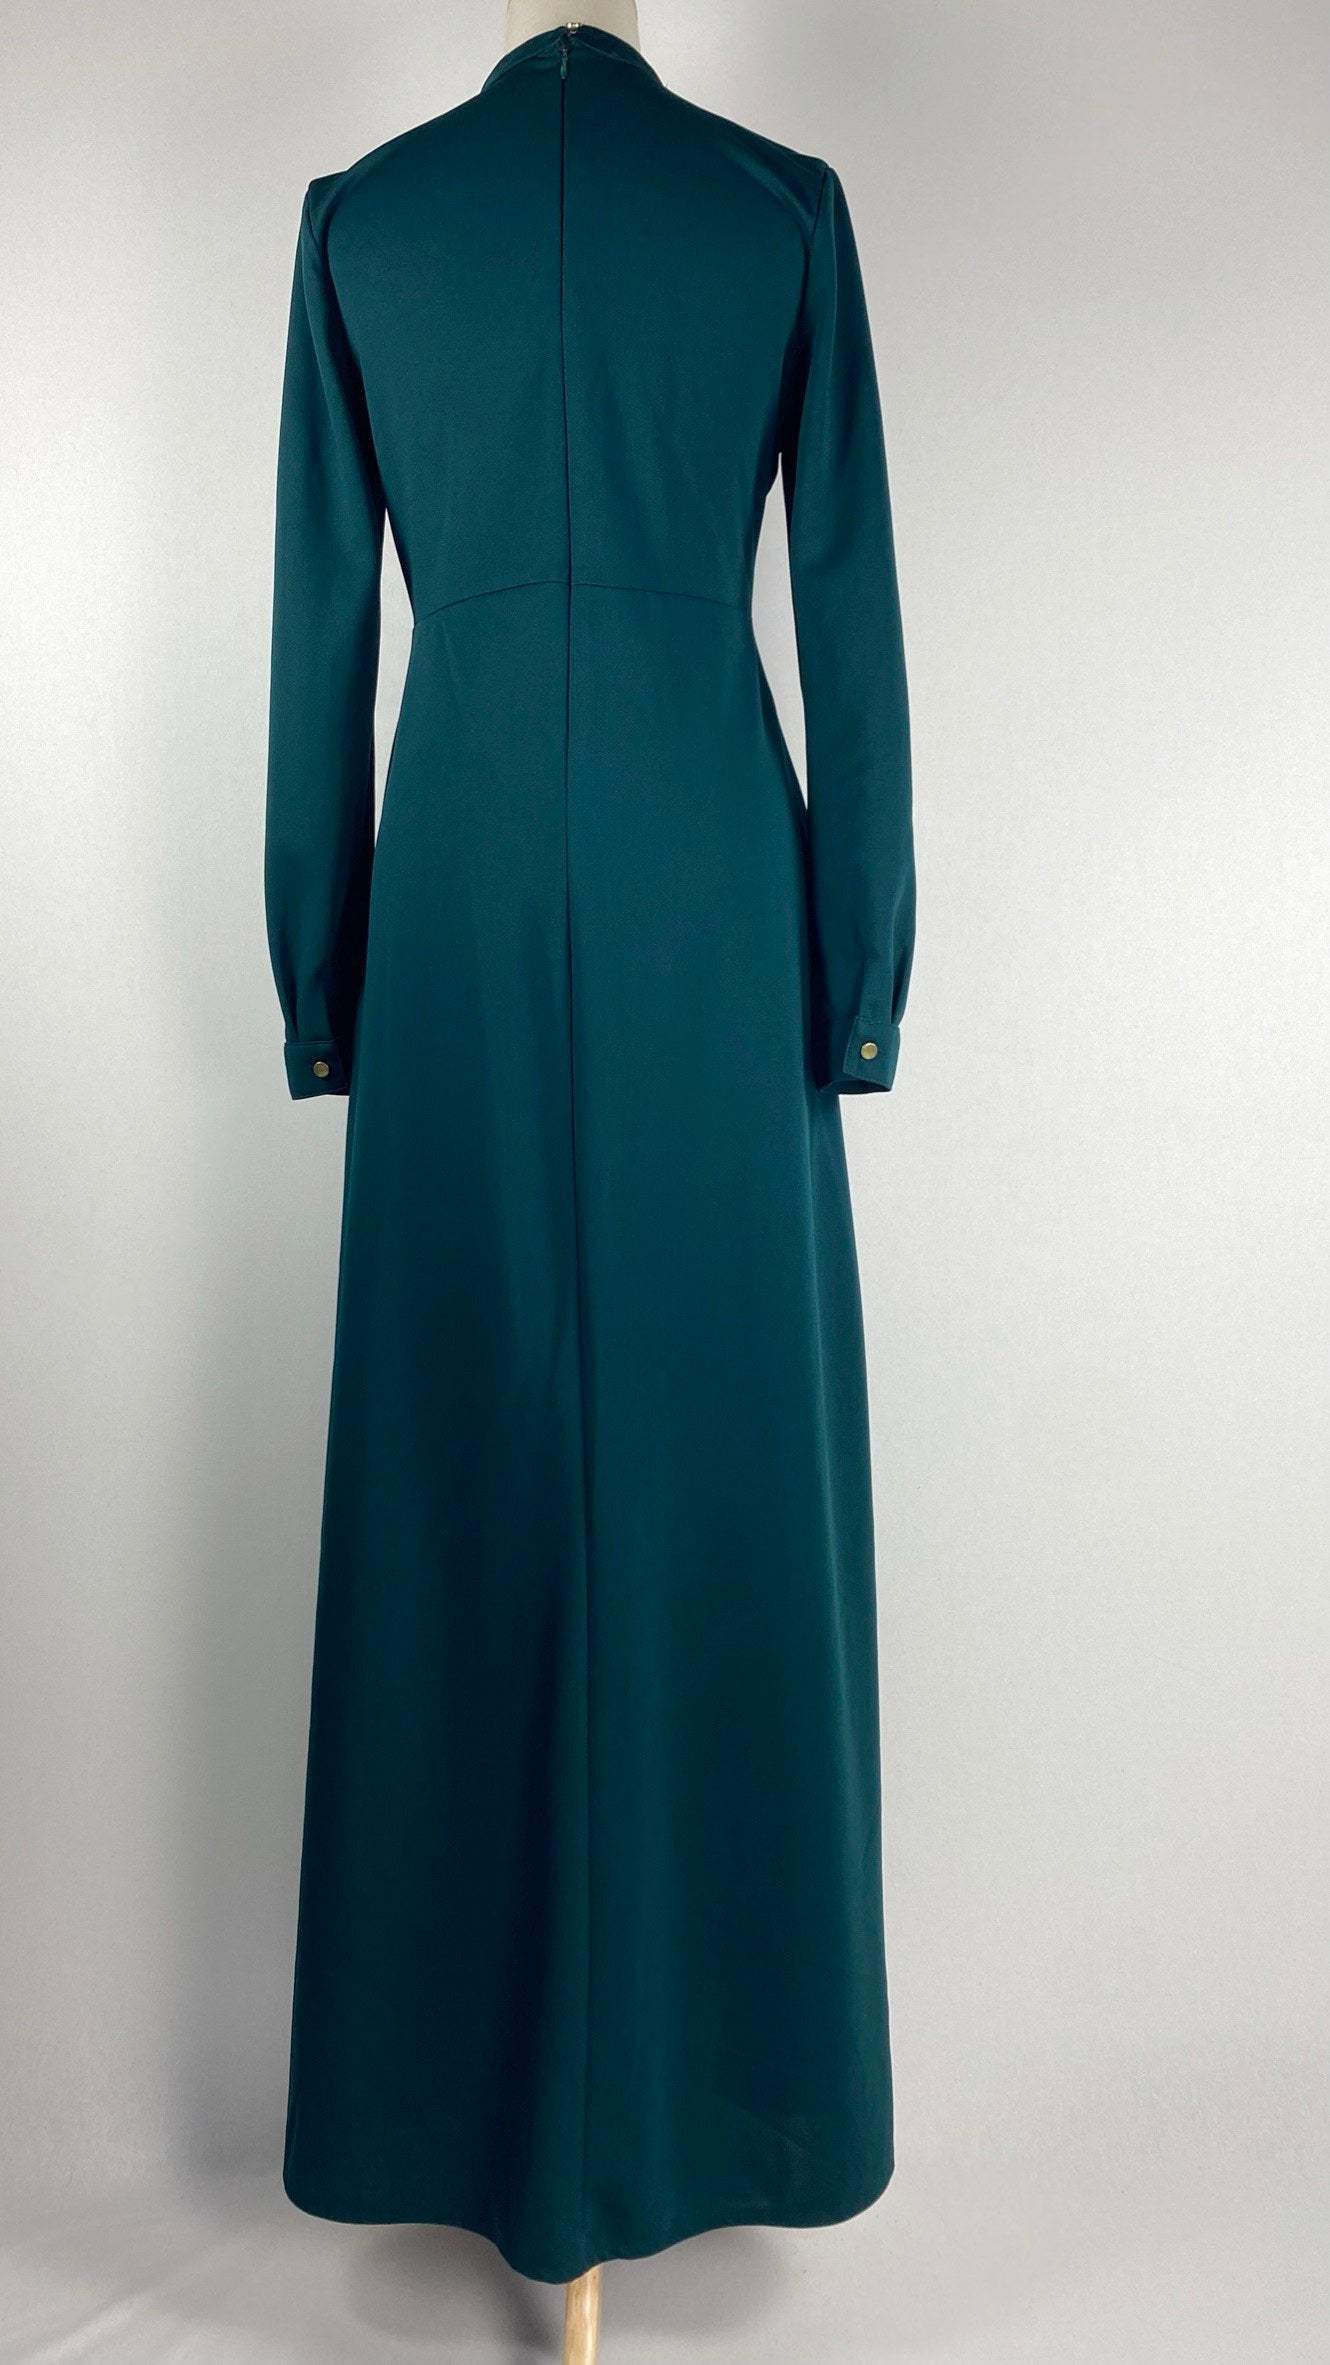 Long Sleeve Maxi Dress with Pleats + Pearls, Green